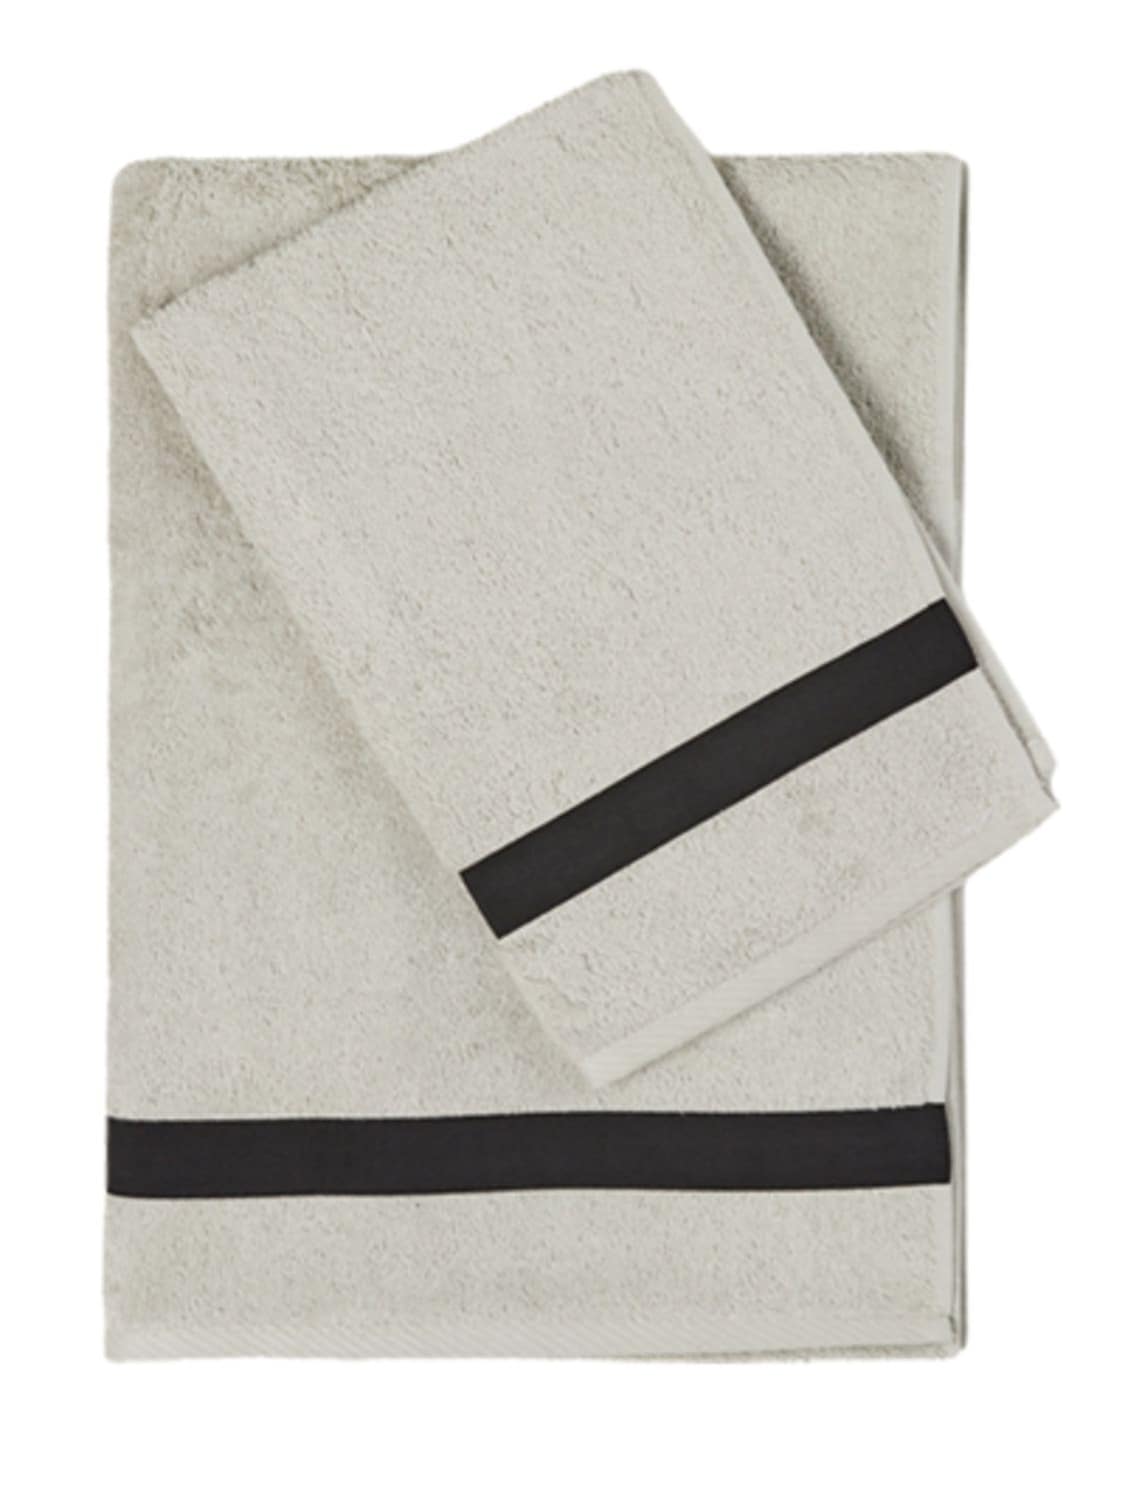 Alessandro Di Marco Set Of 2 Cotton Terrycloth Towels In Grey,black